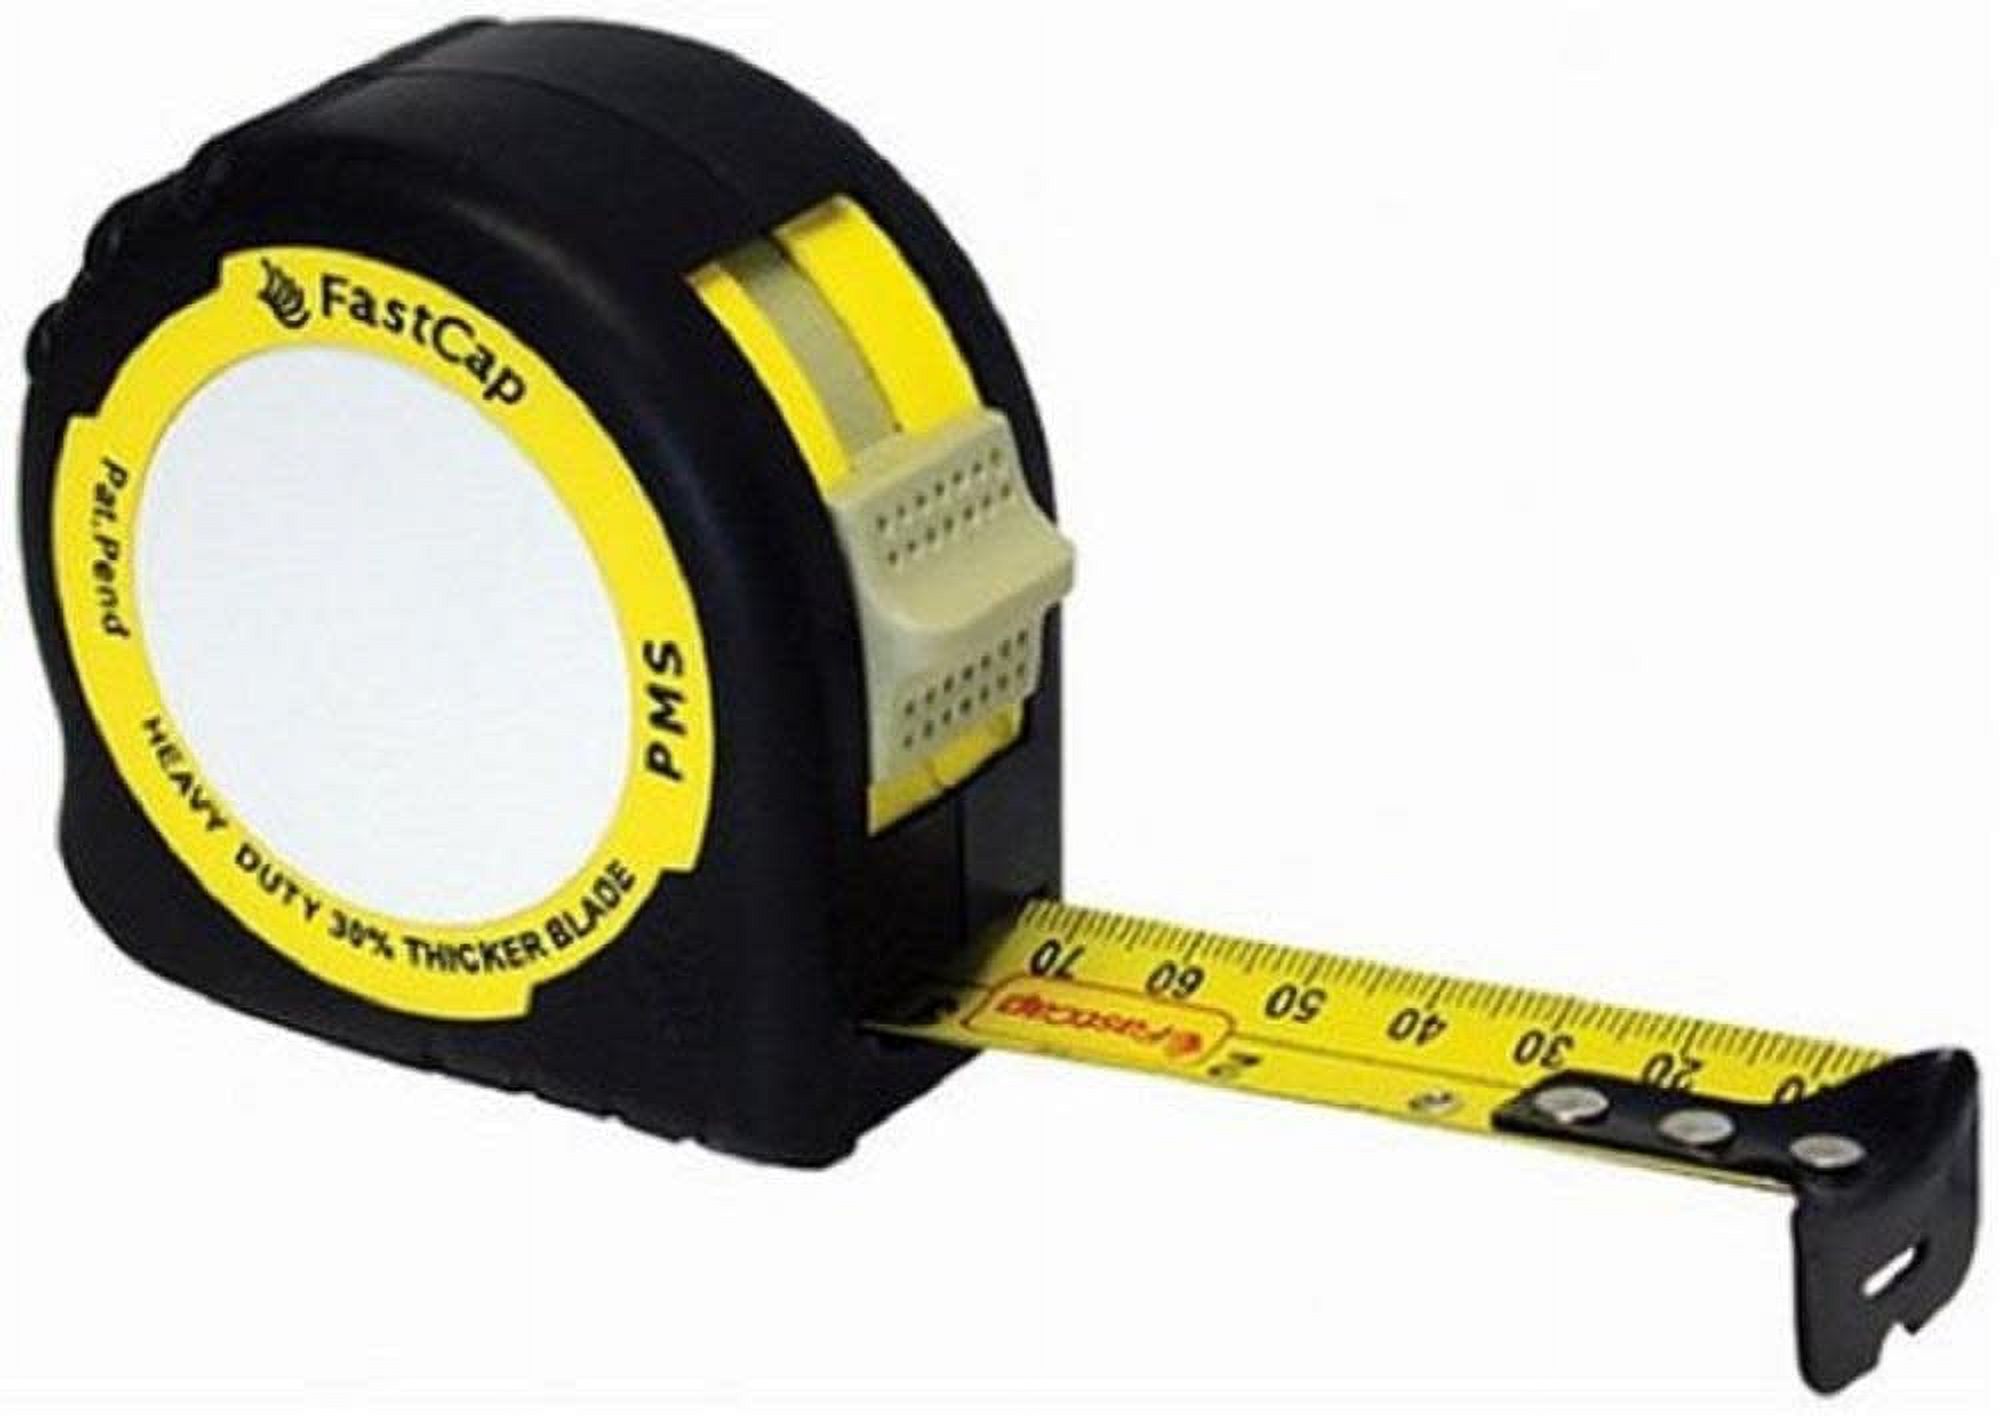 Fastcap Tape Measure,1 In x 16 ft,Black/Yellow  PMS-16 - image 1 of 2